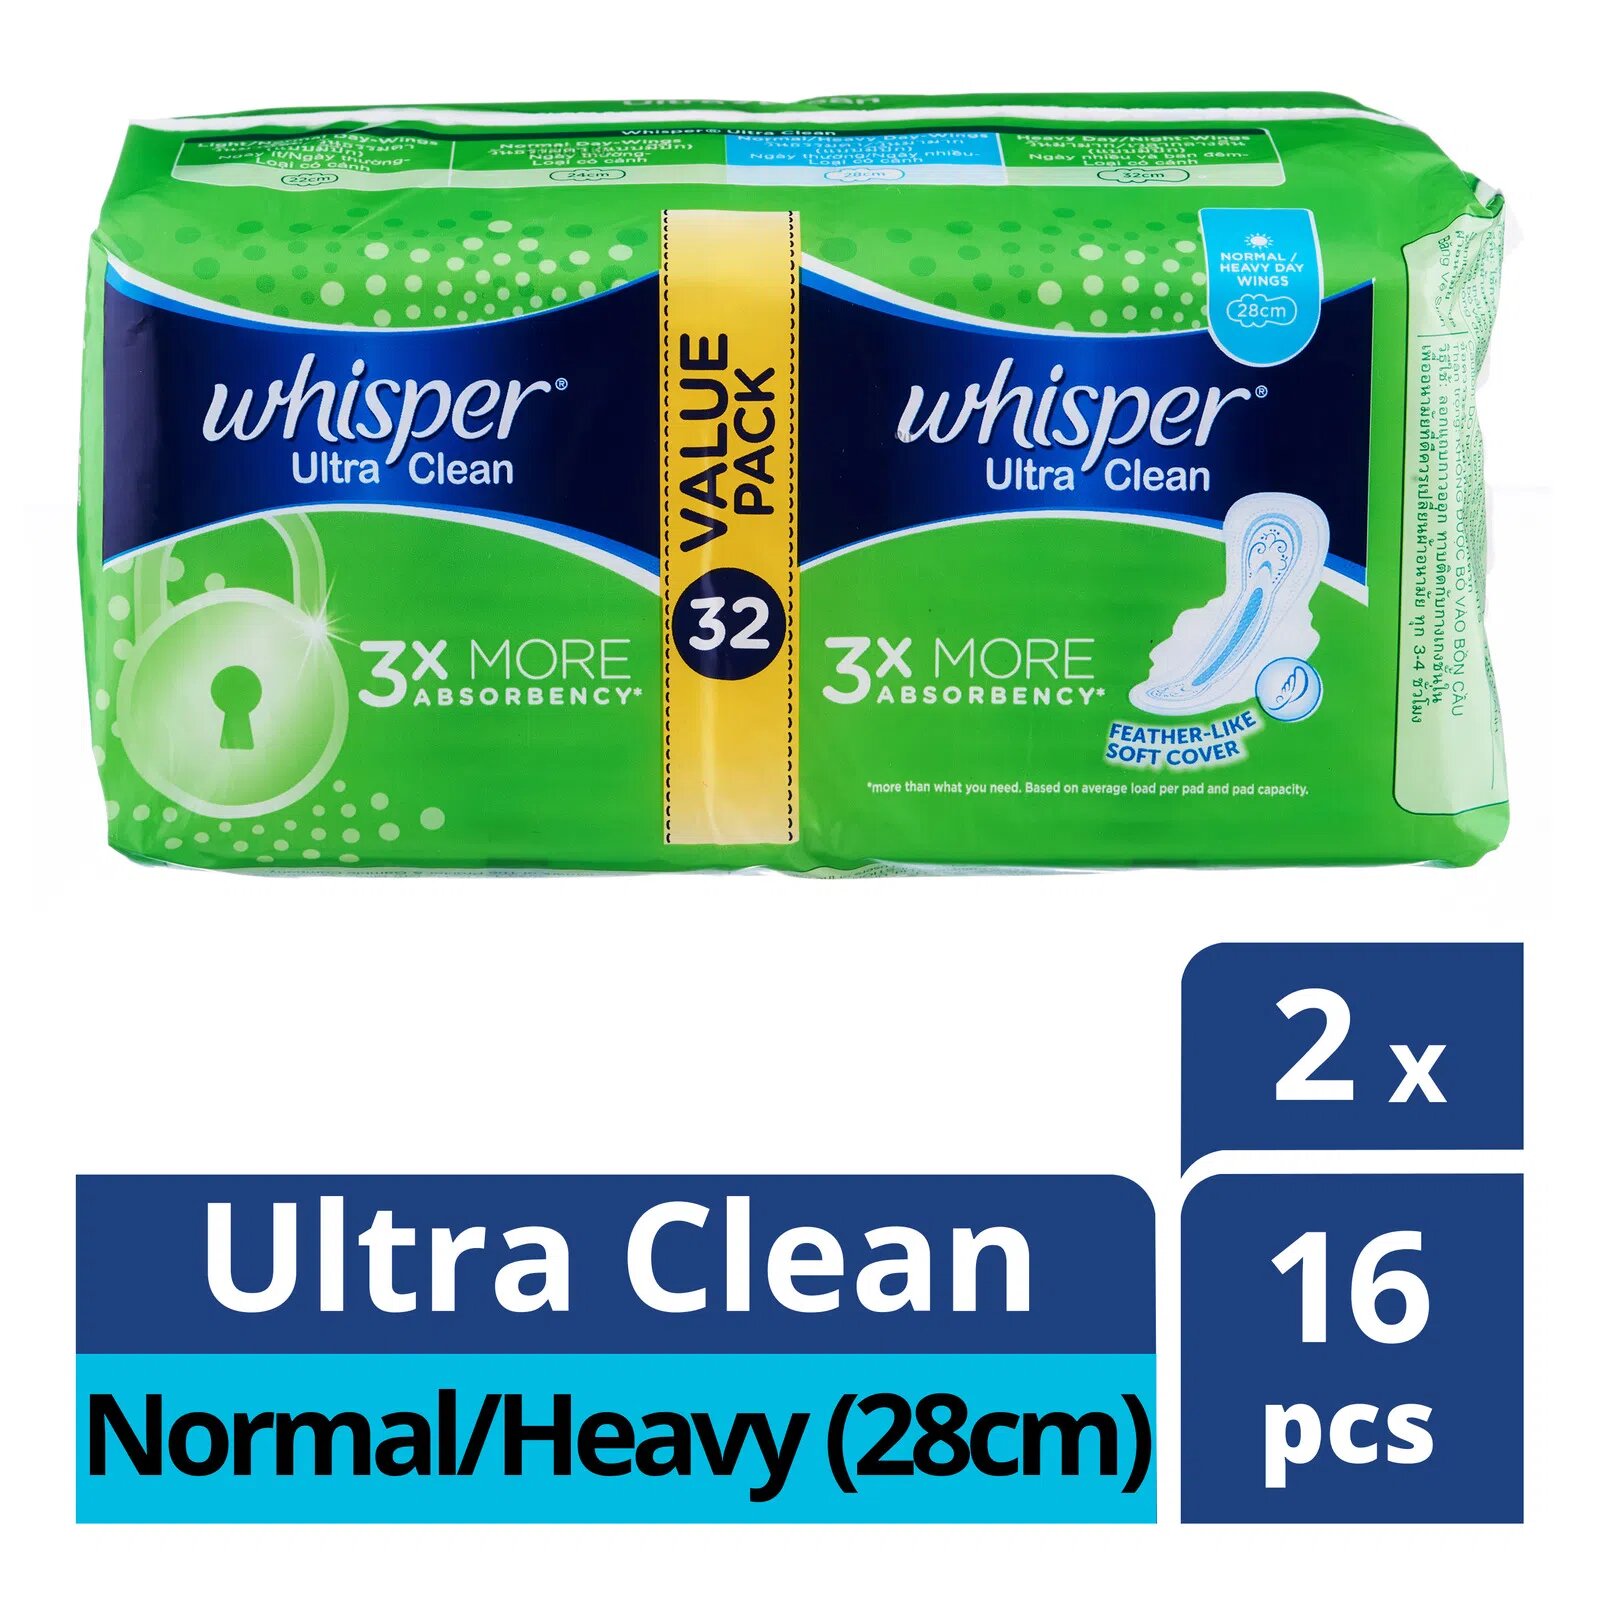 Whisper Ultra Clean Wing Pads - Normal/Heavy Day (28cm)